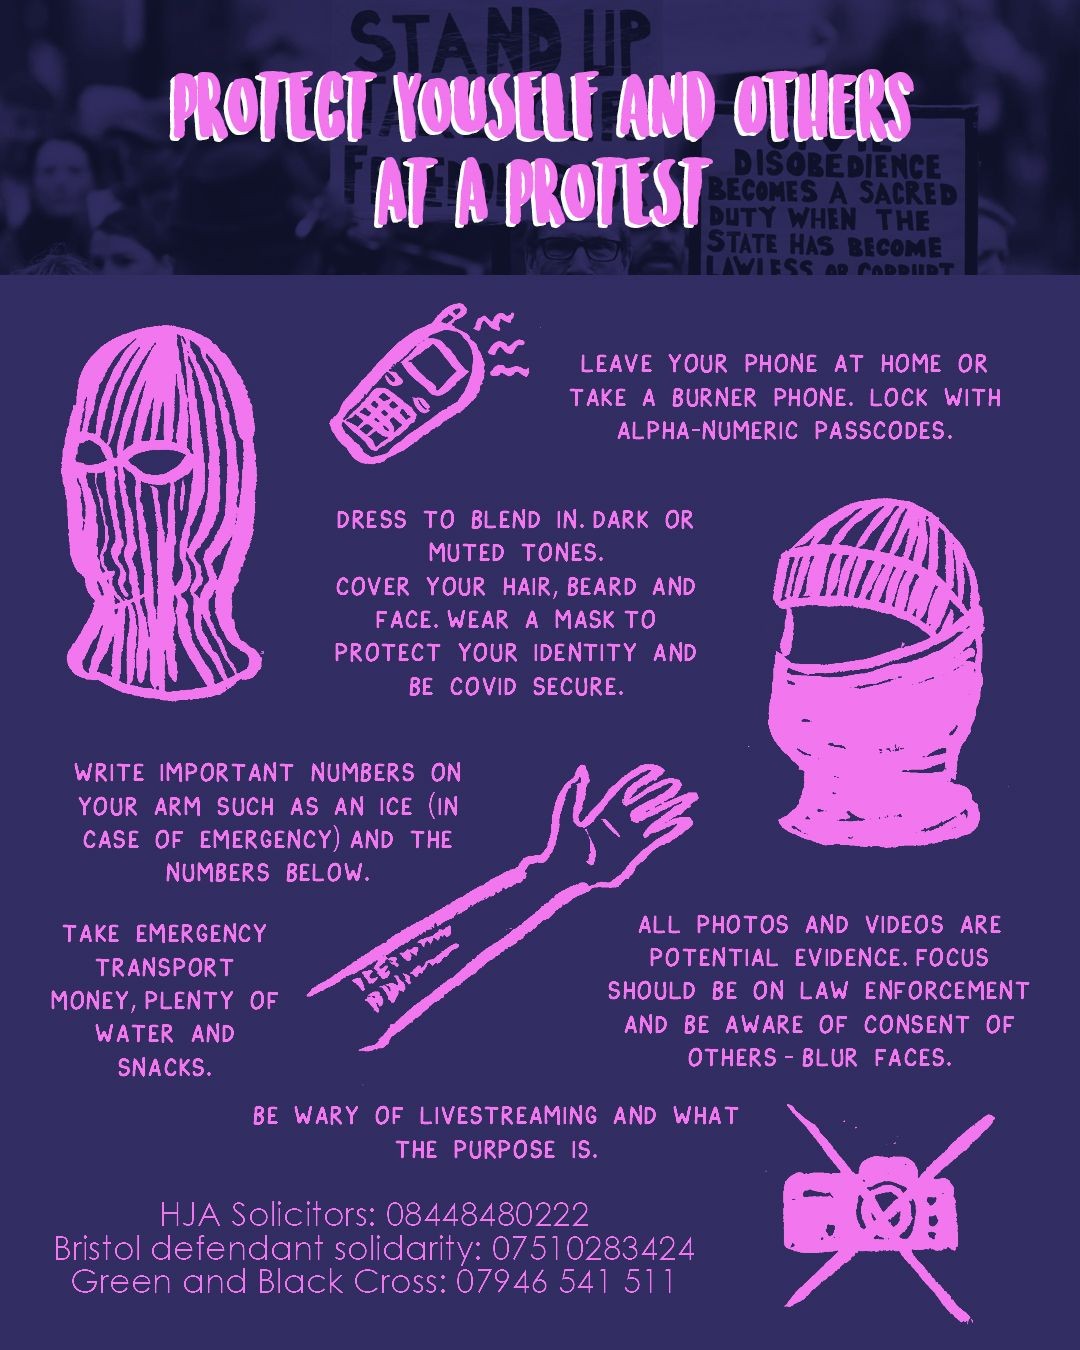 Protect yourselves and others at a protest